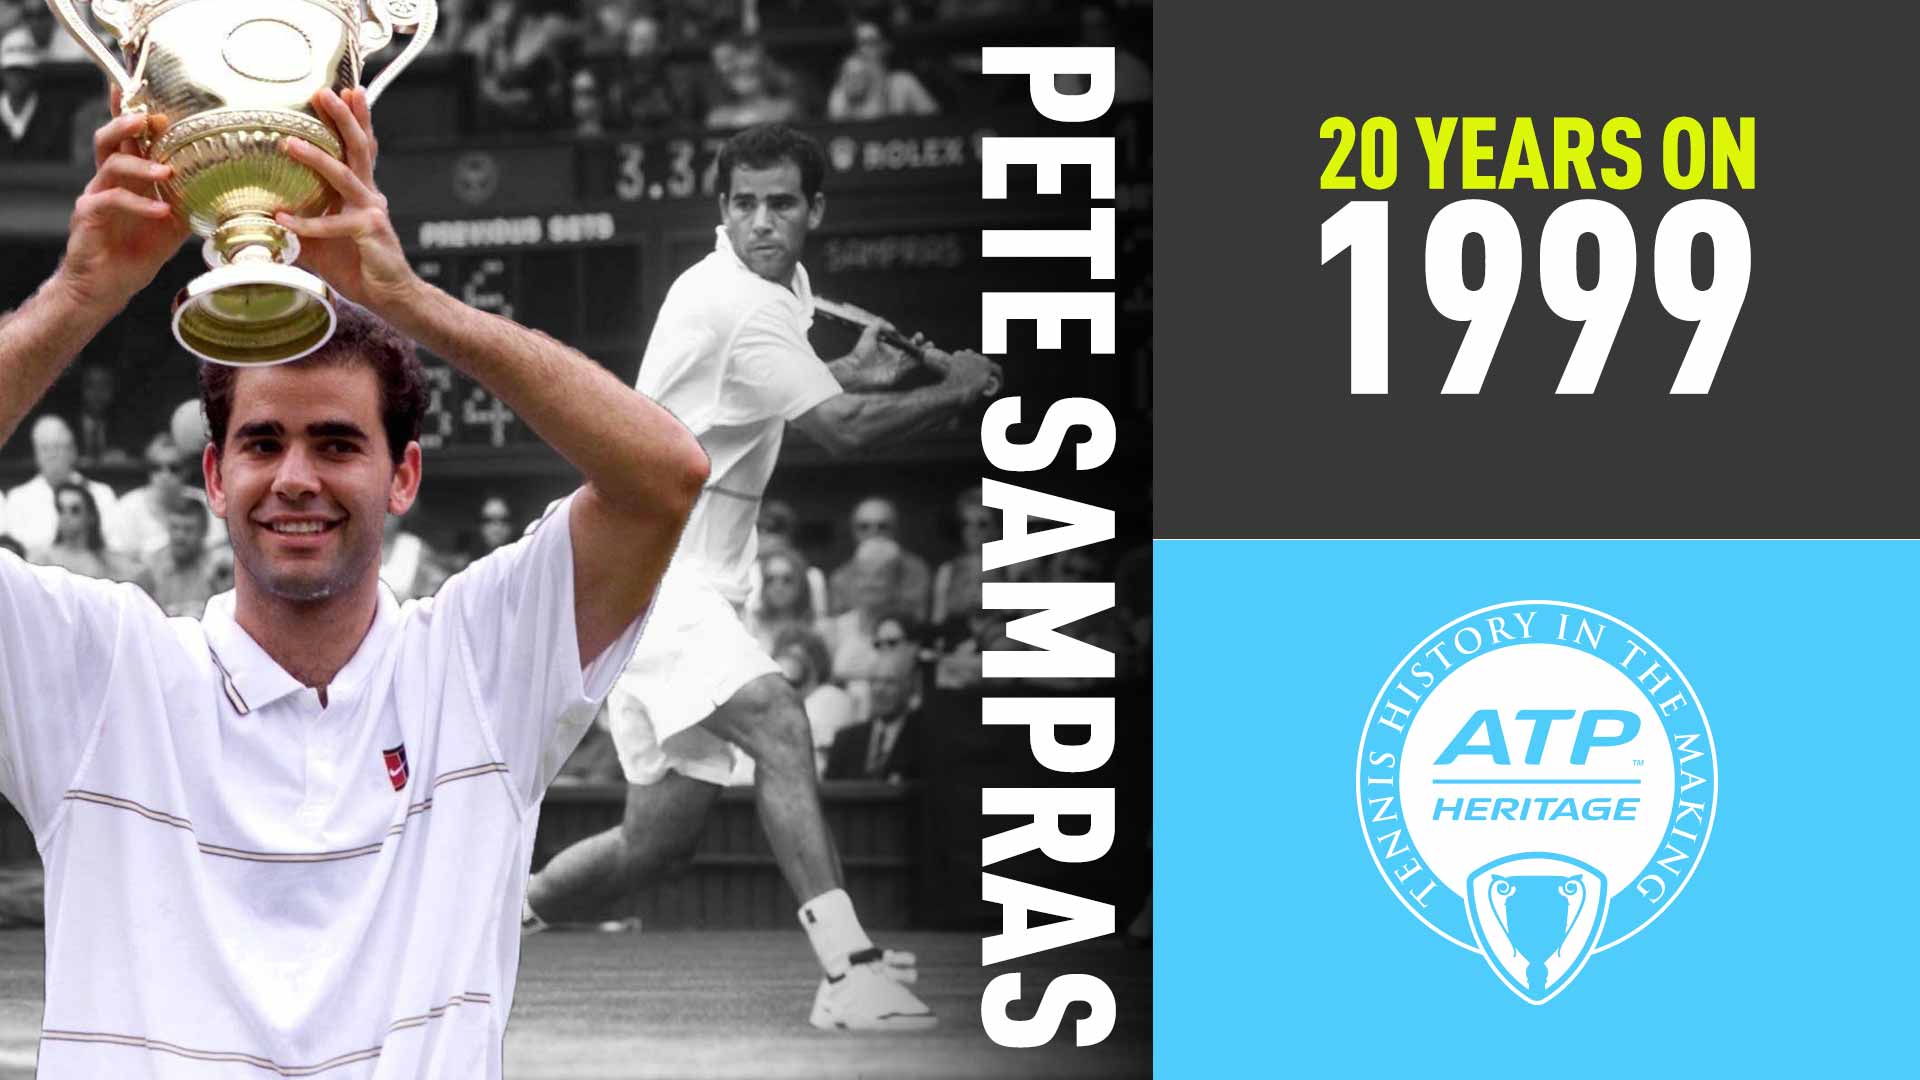 Pete Sampras played the best match of his career in the 1999 Wimbledon final, when he beat his long-time rival Andre Agassi.